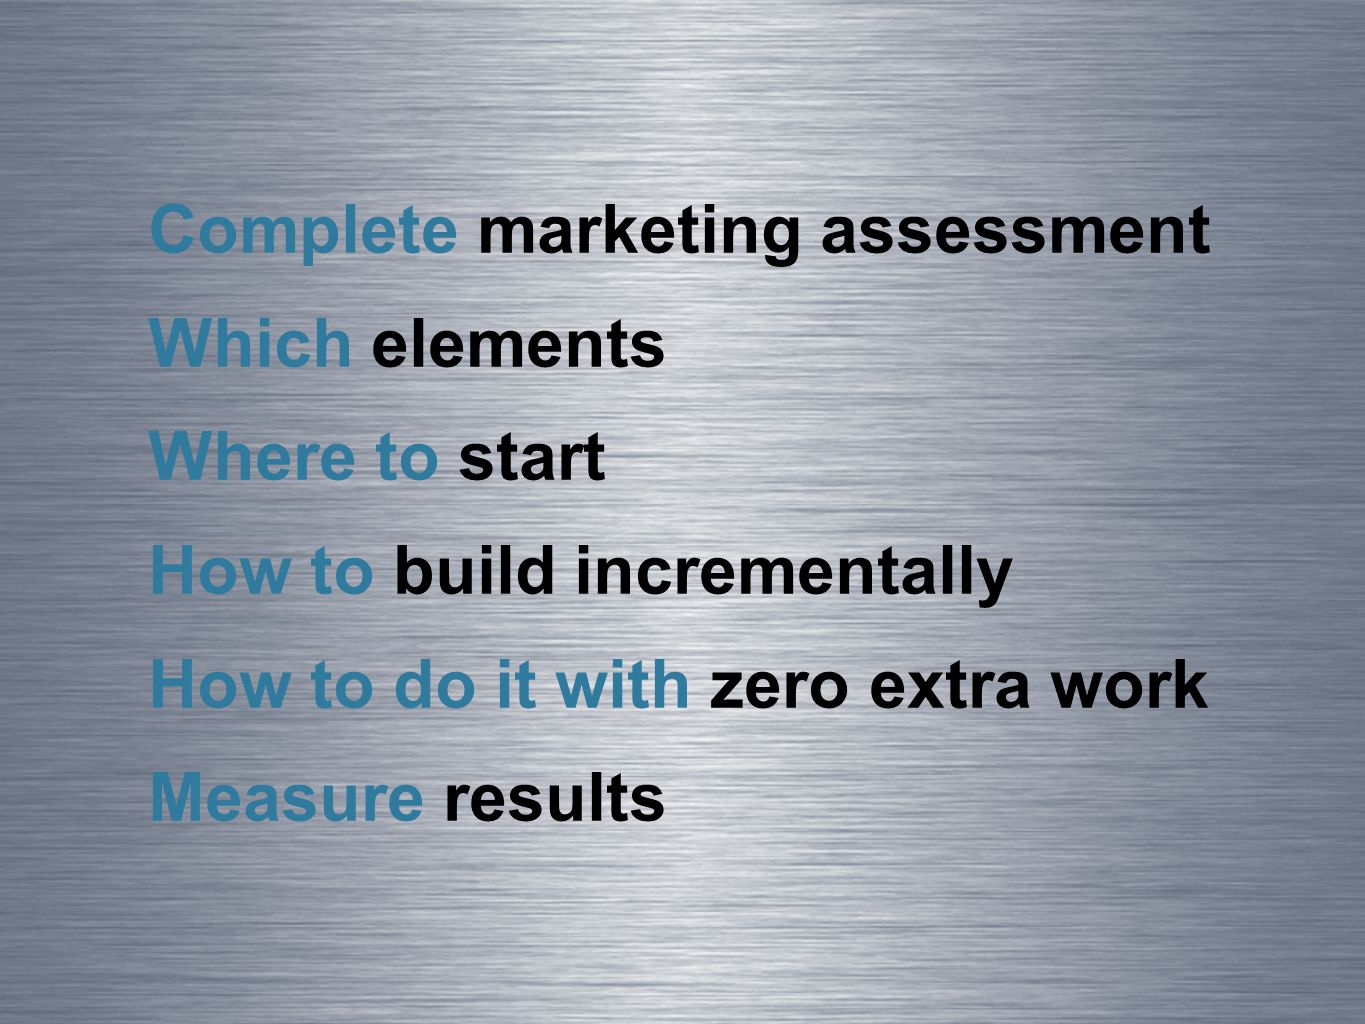 Complete marketing assessment Which elements Where to start How to build incrementally How to do it with zero extra work Measure results